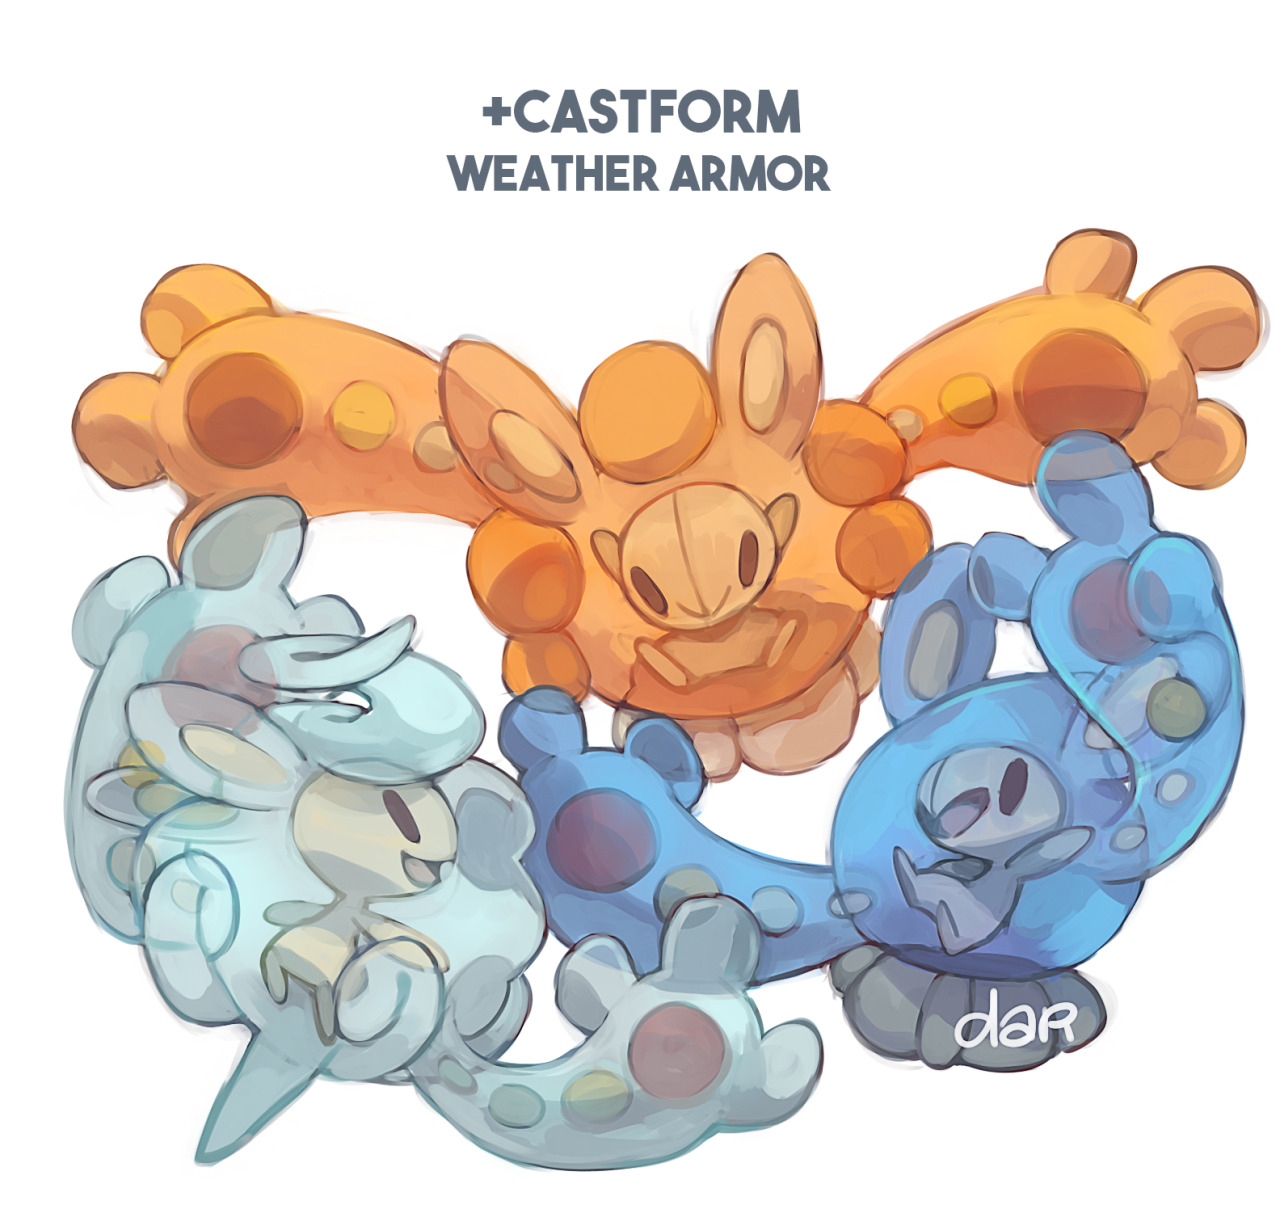 dar-draws:  Pokemon crossbreed variations featuring my favorite mon, REUNICLUS, with